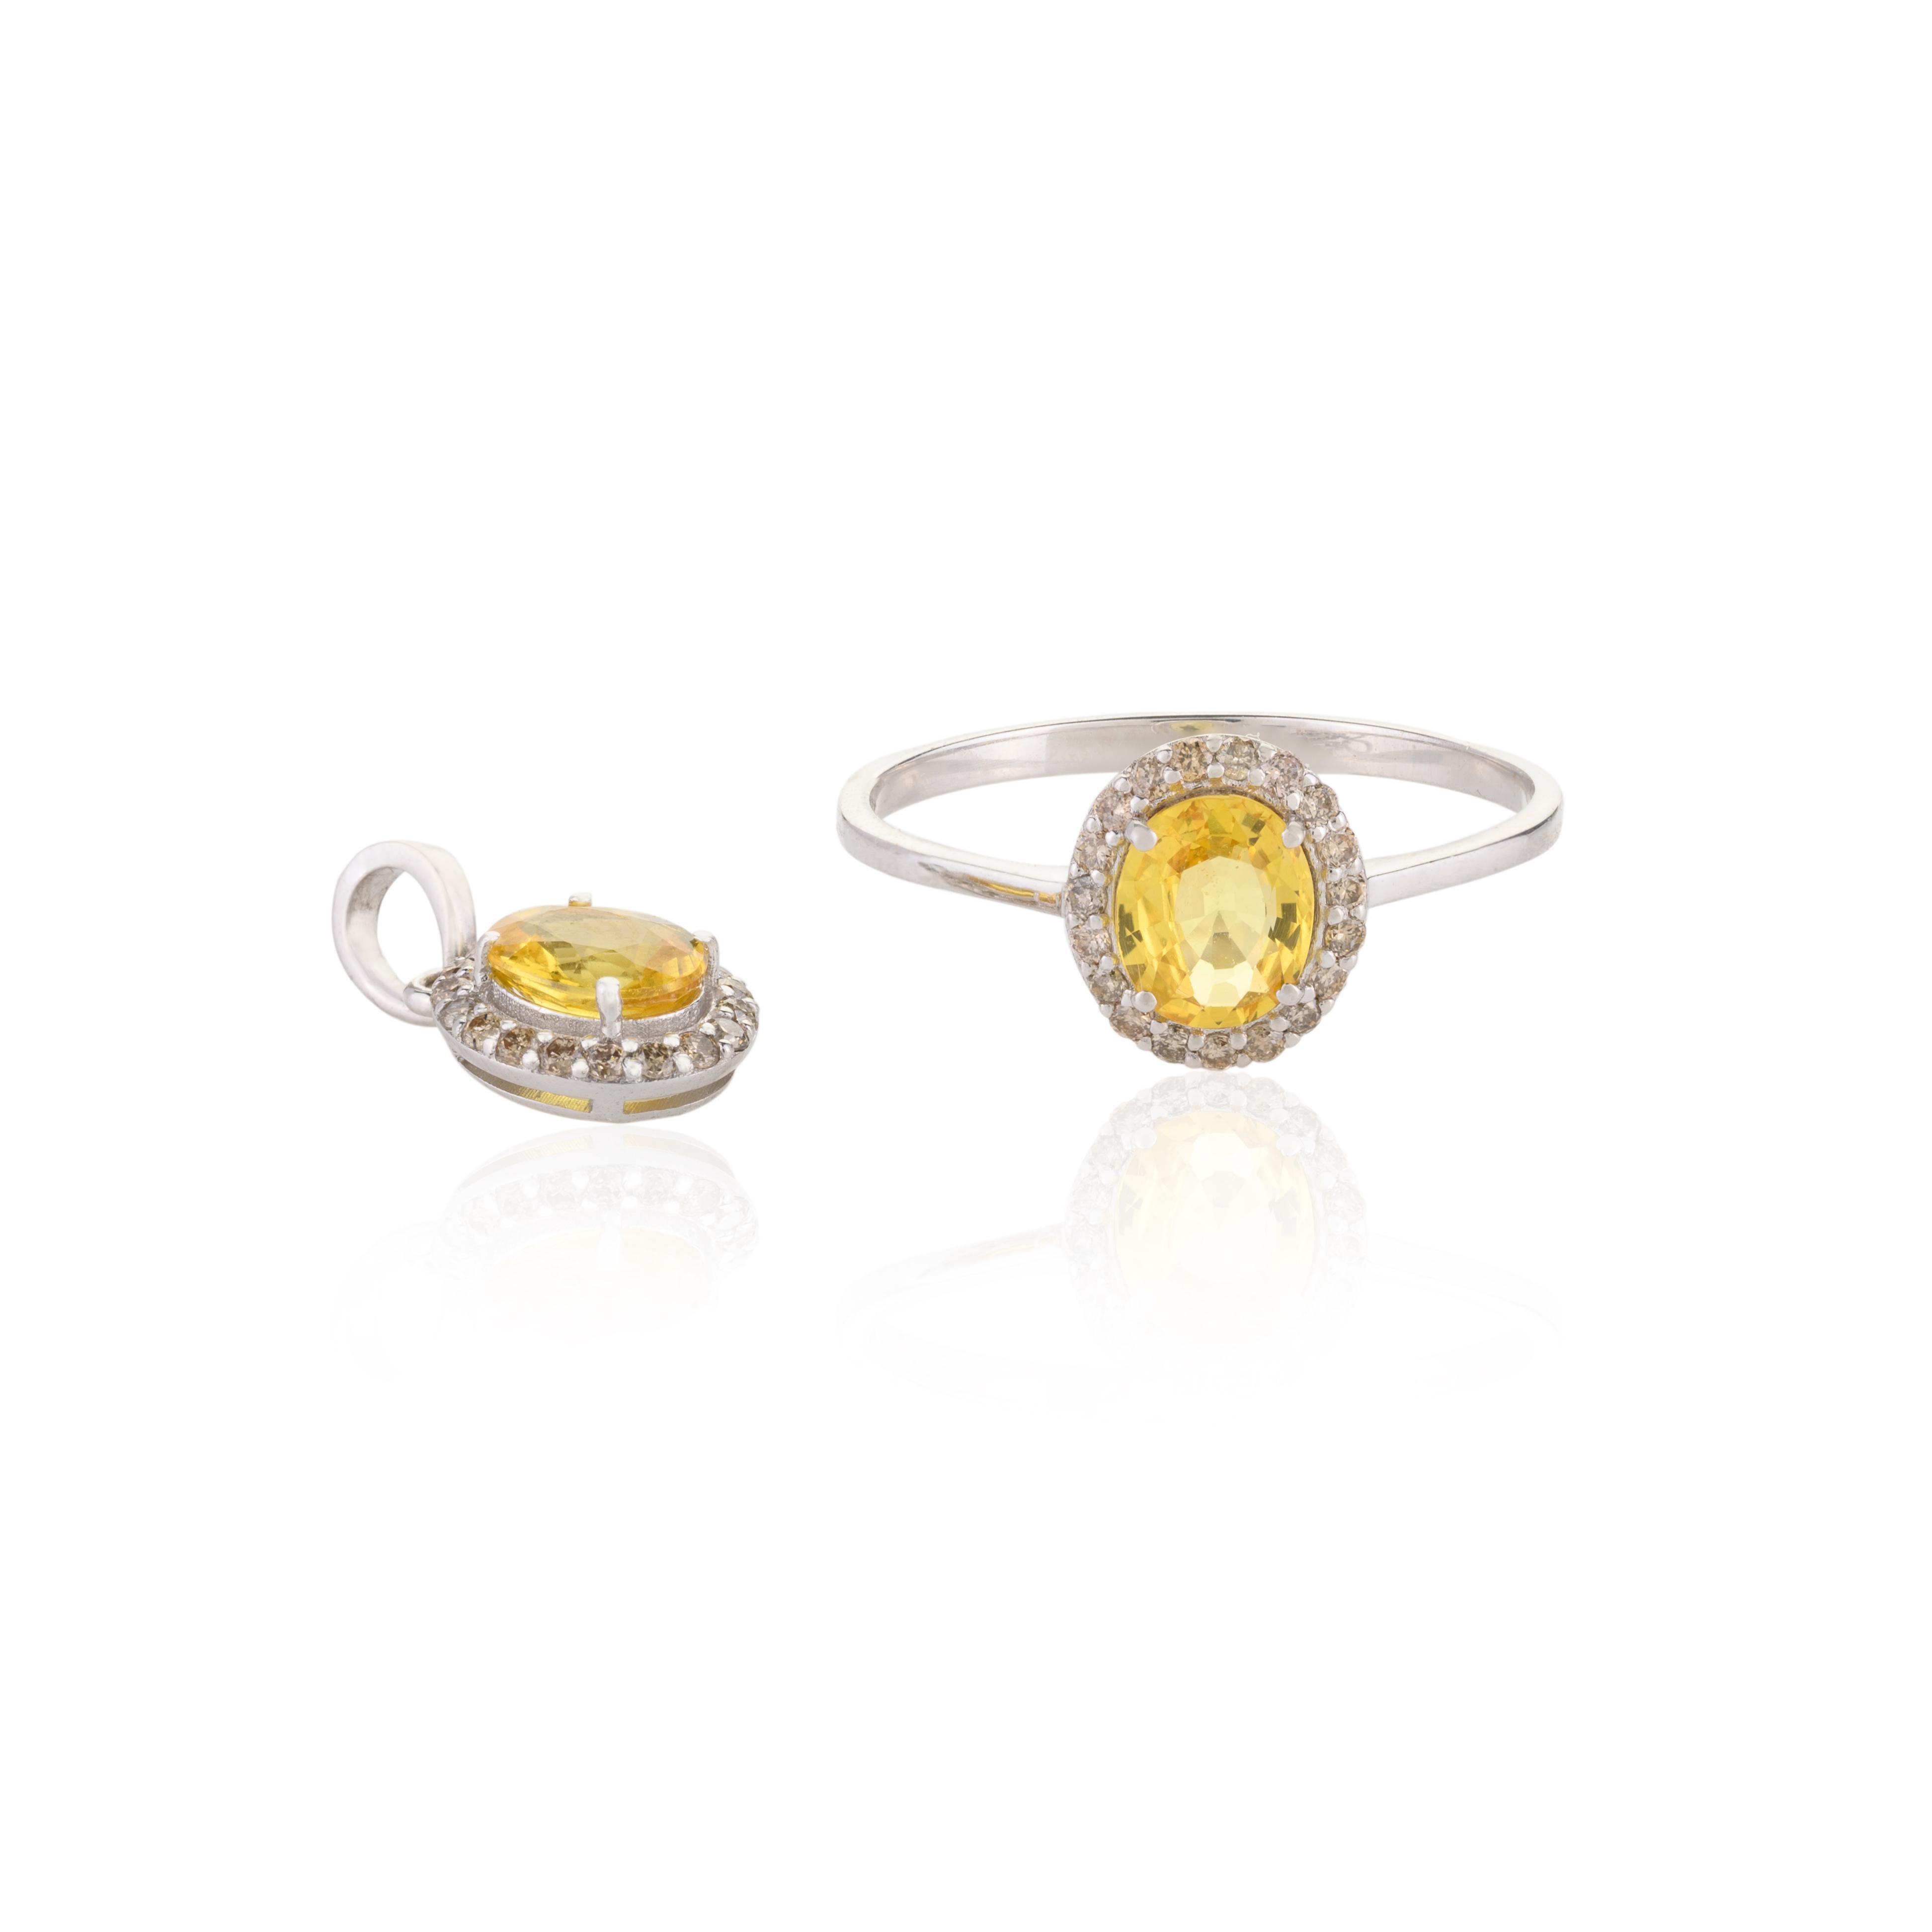 For Sale:  18k White Gold Yellow Sapphire Halo Diamond Ring and Pendant Jewelry Set for Her 12